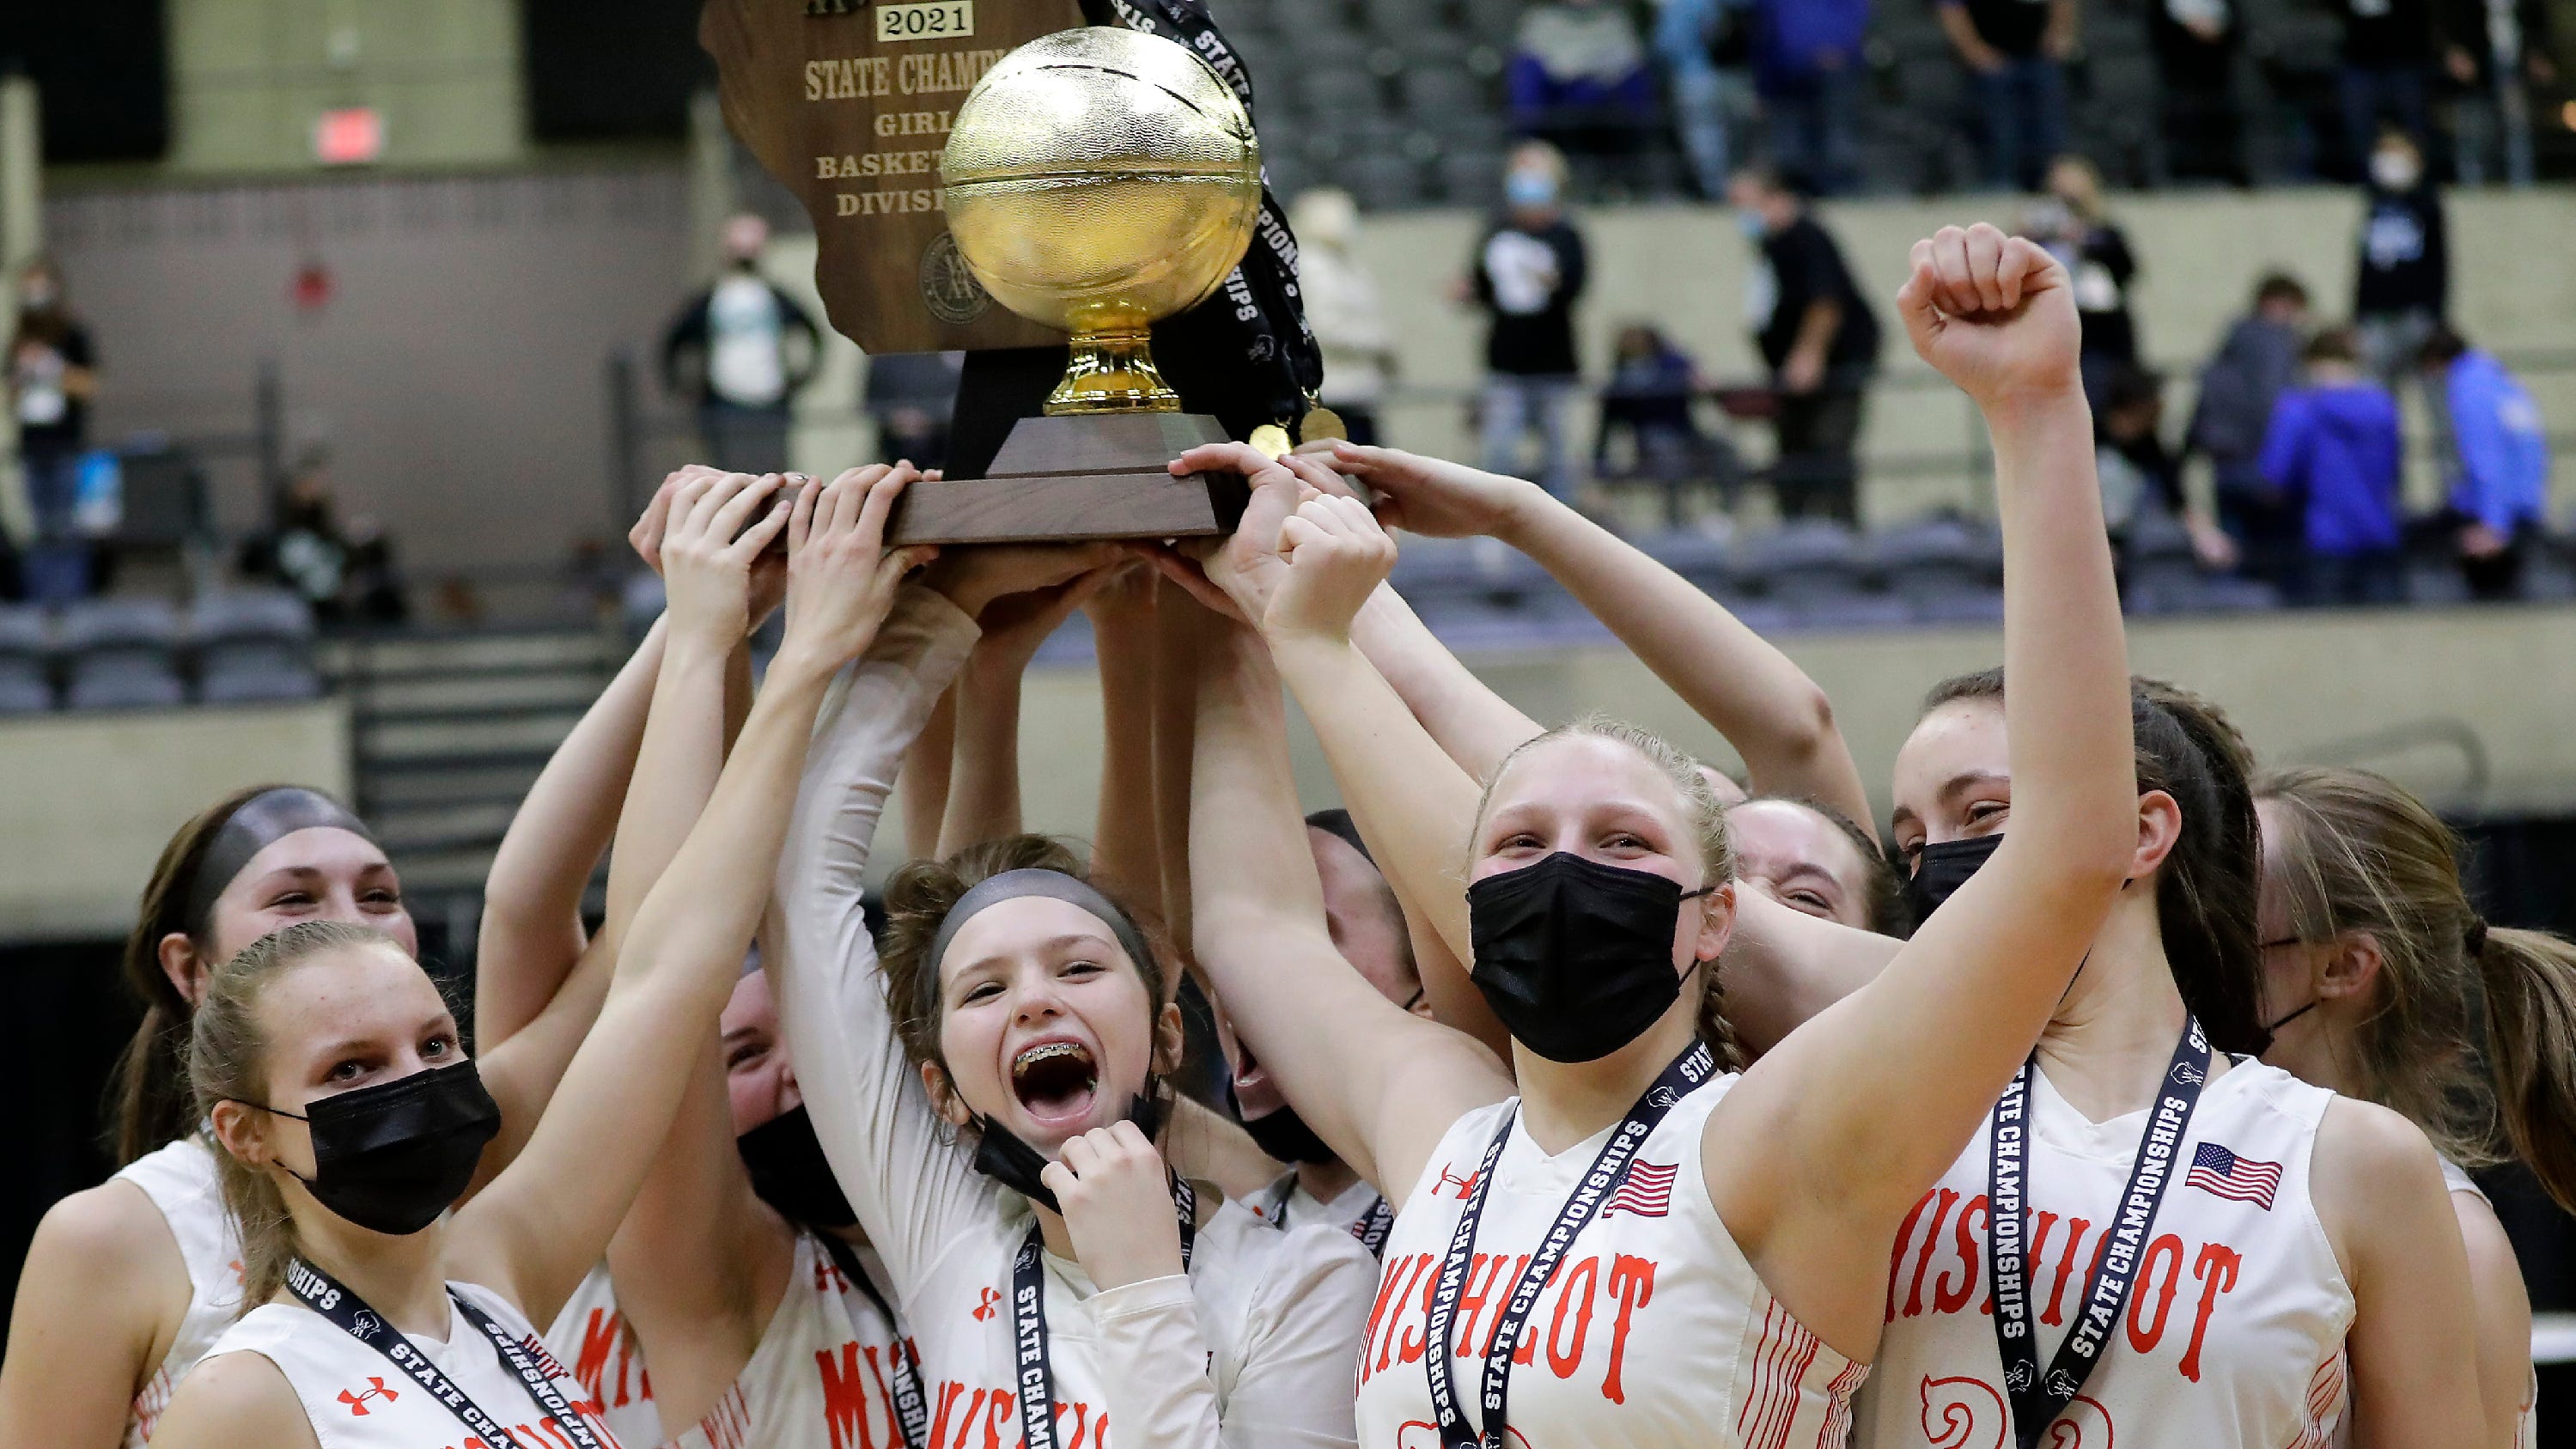 WIAA state girls basketball Mishicot wins Division 4 championship